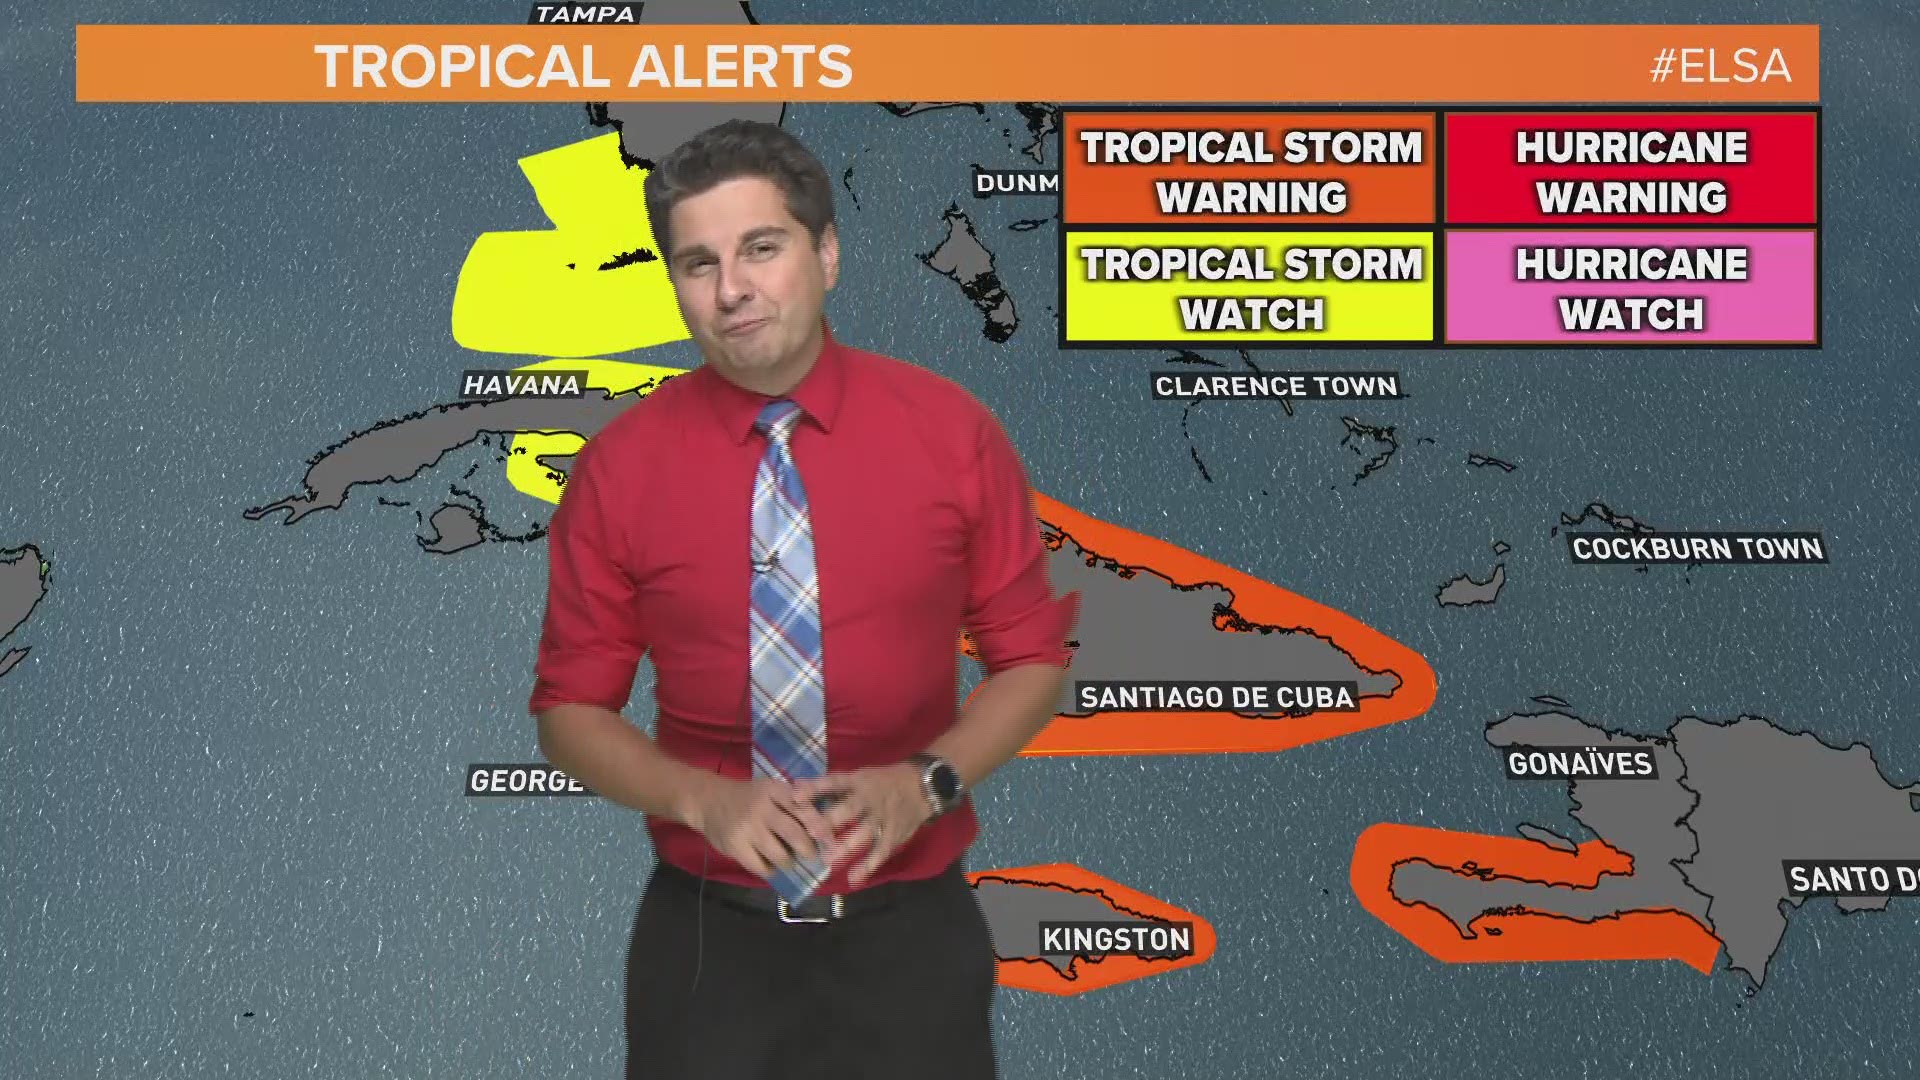 Quick lesson on when the National Hurricane Center updates us on tropical cyclones